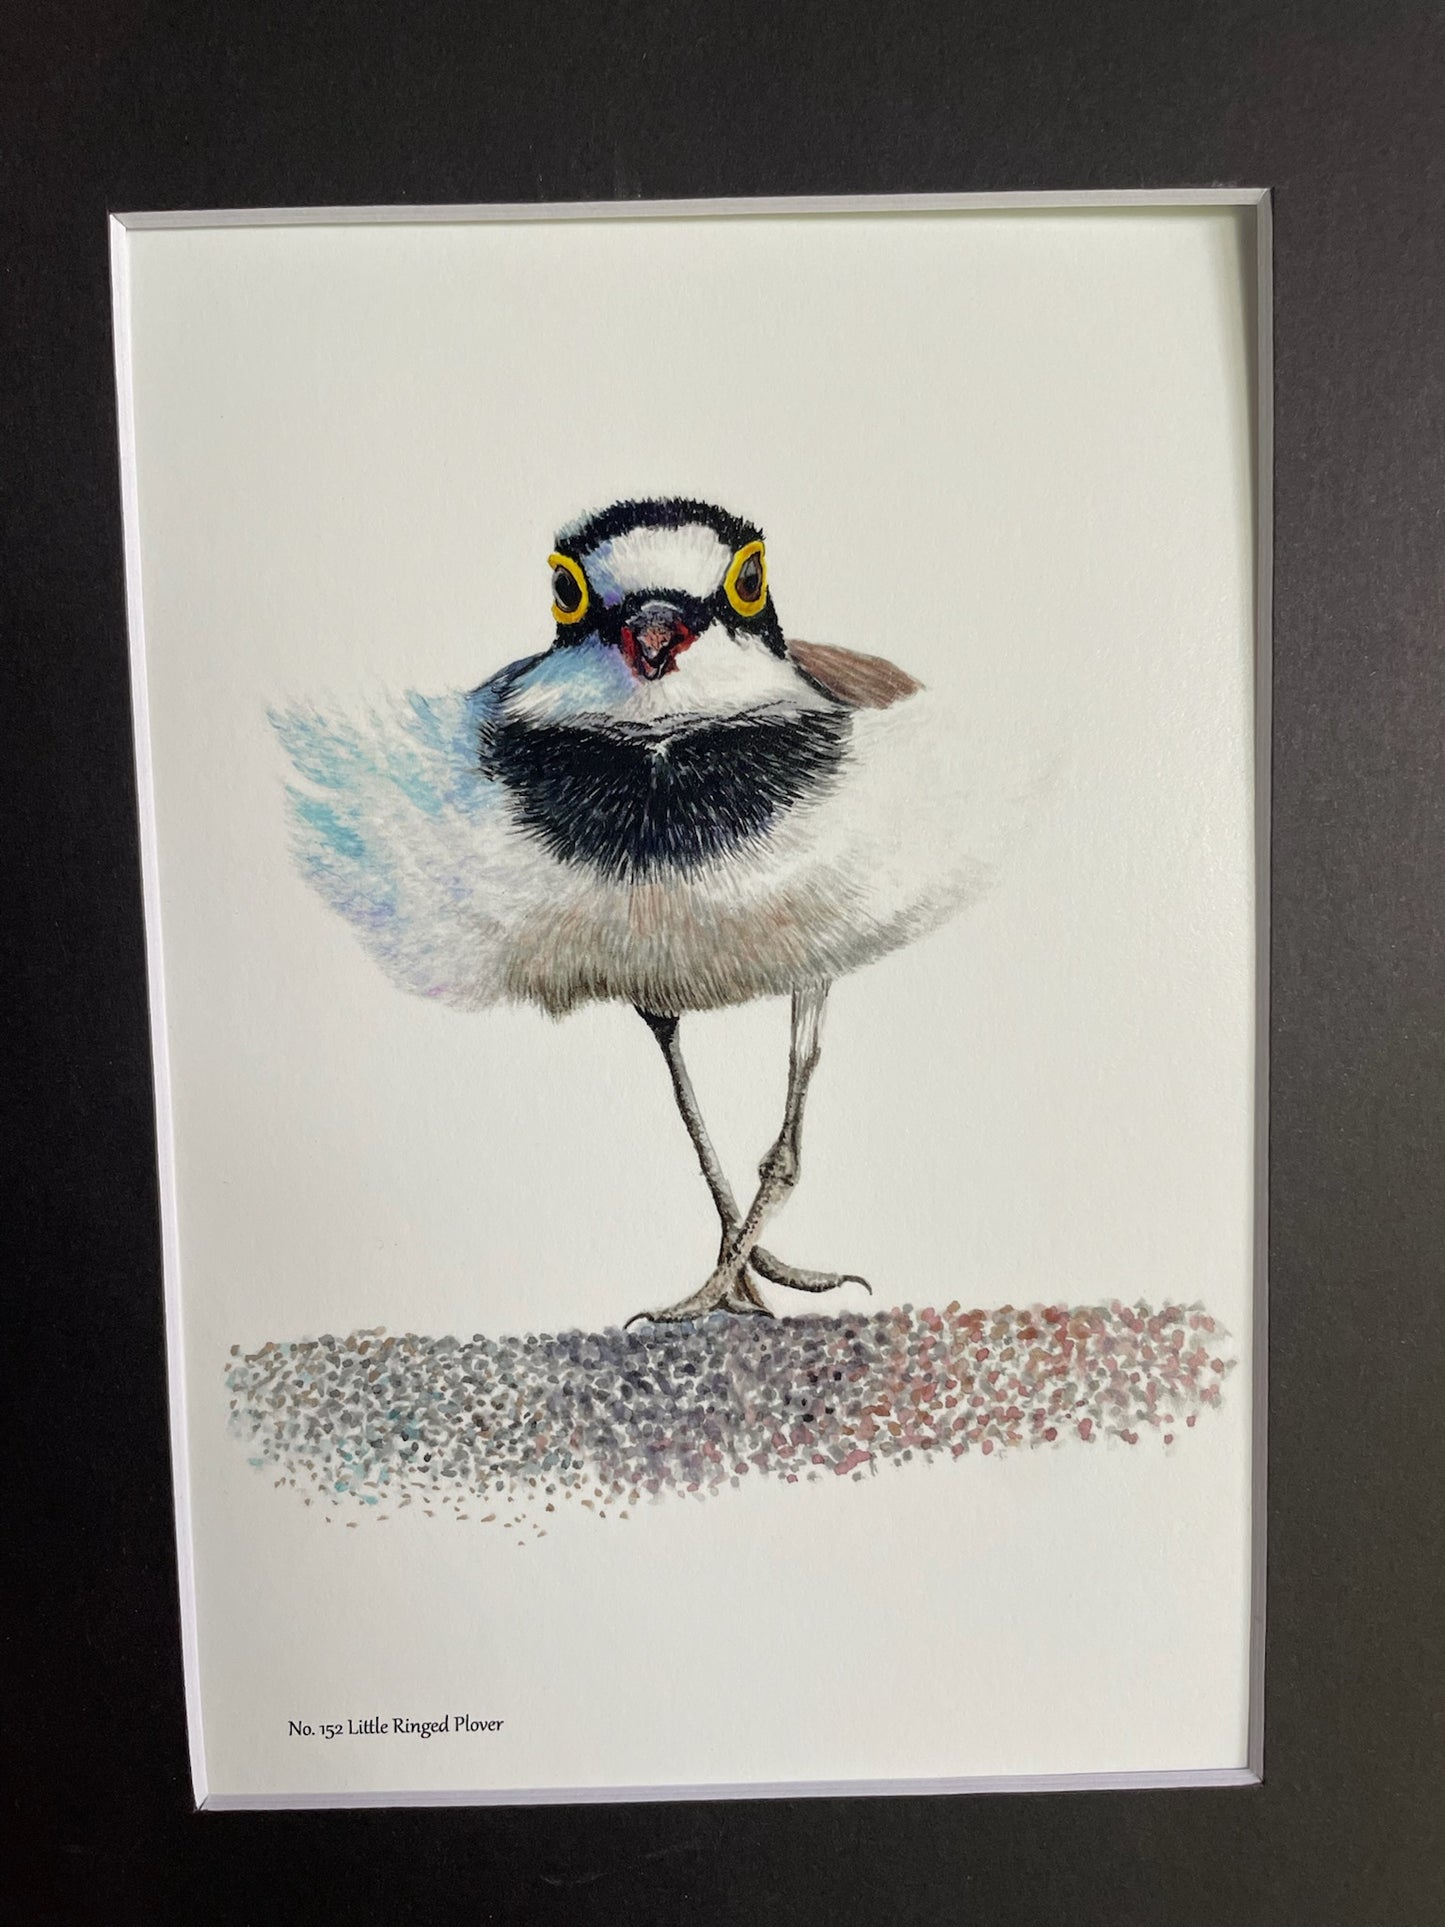 Little Ringed Plover - Bird Art by KB - Giclee Print with Black Mat